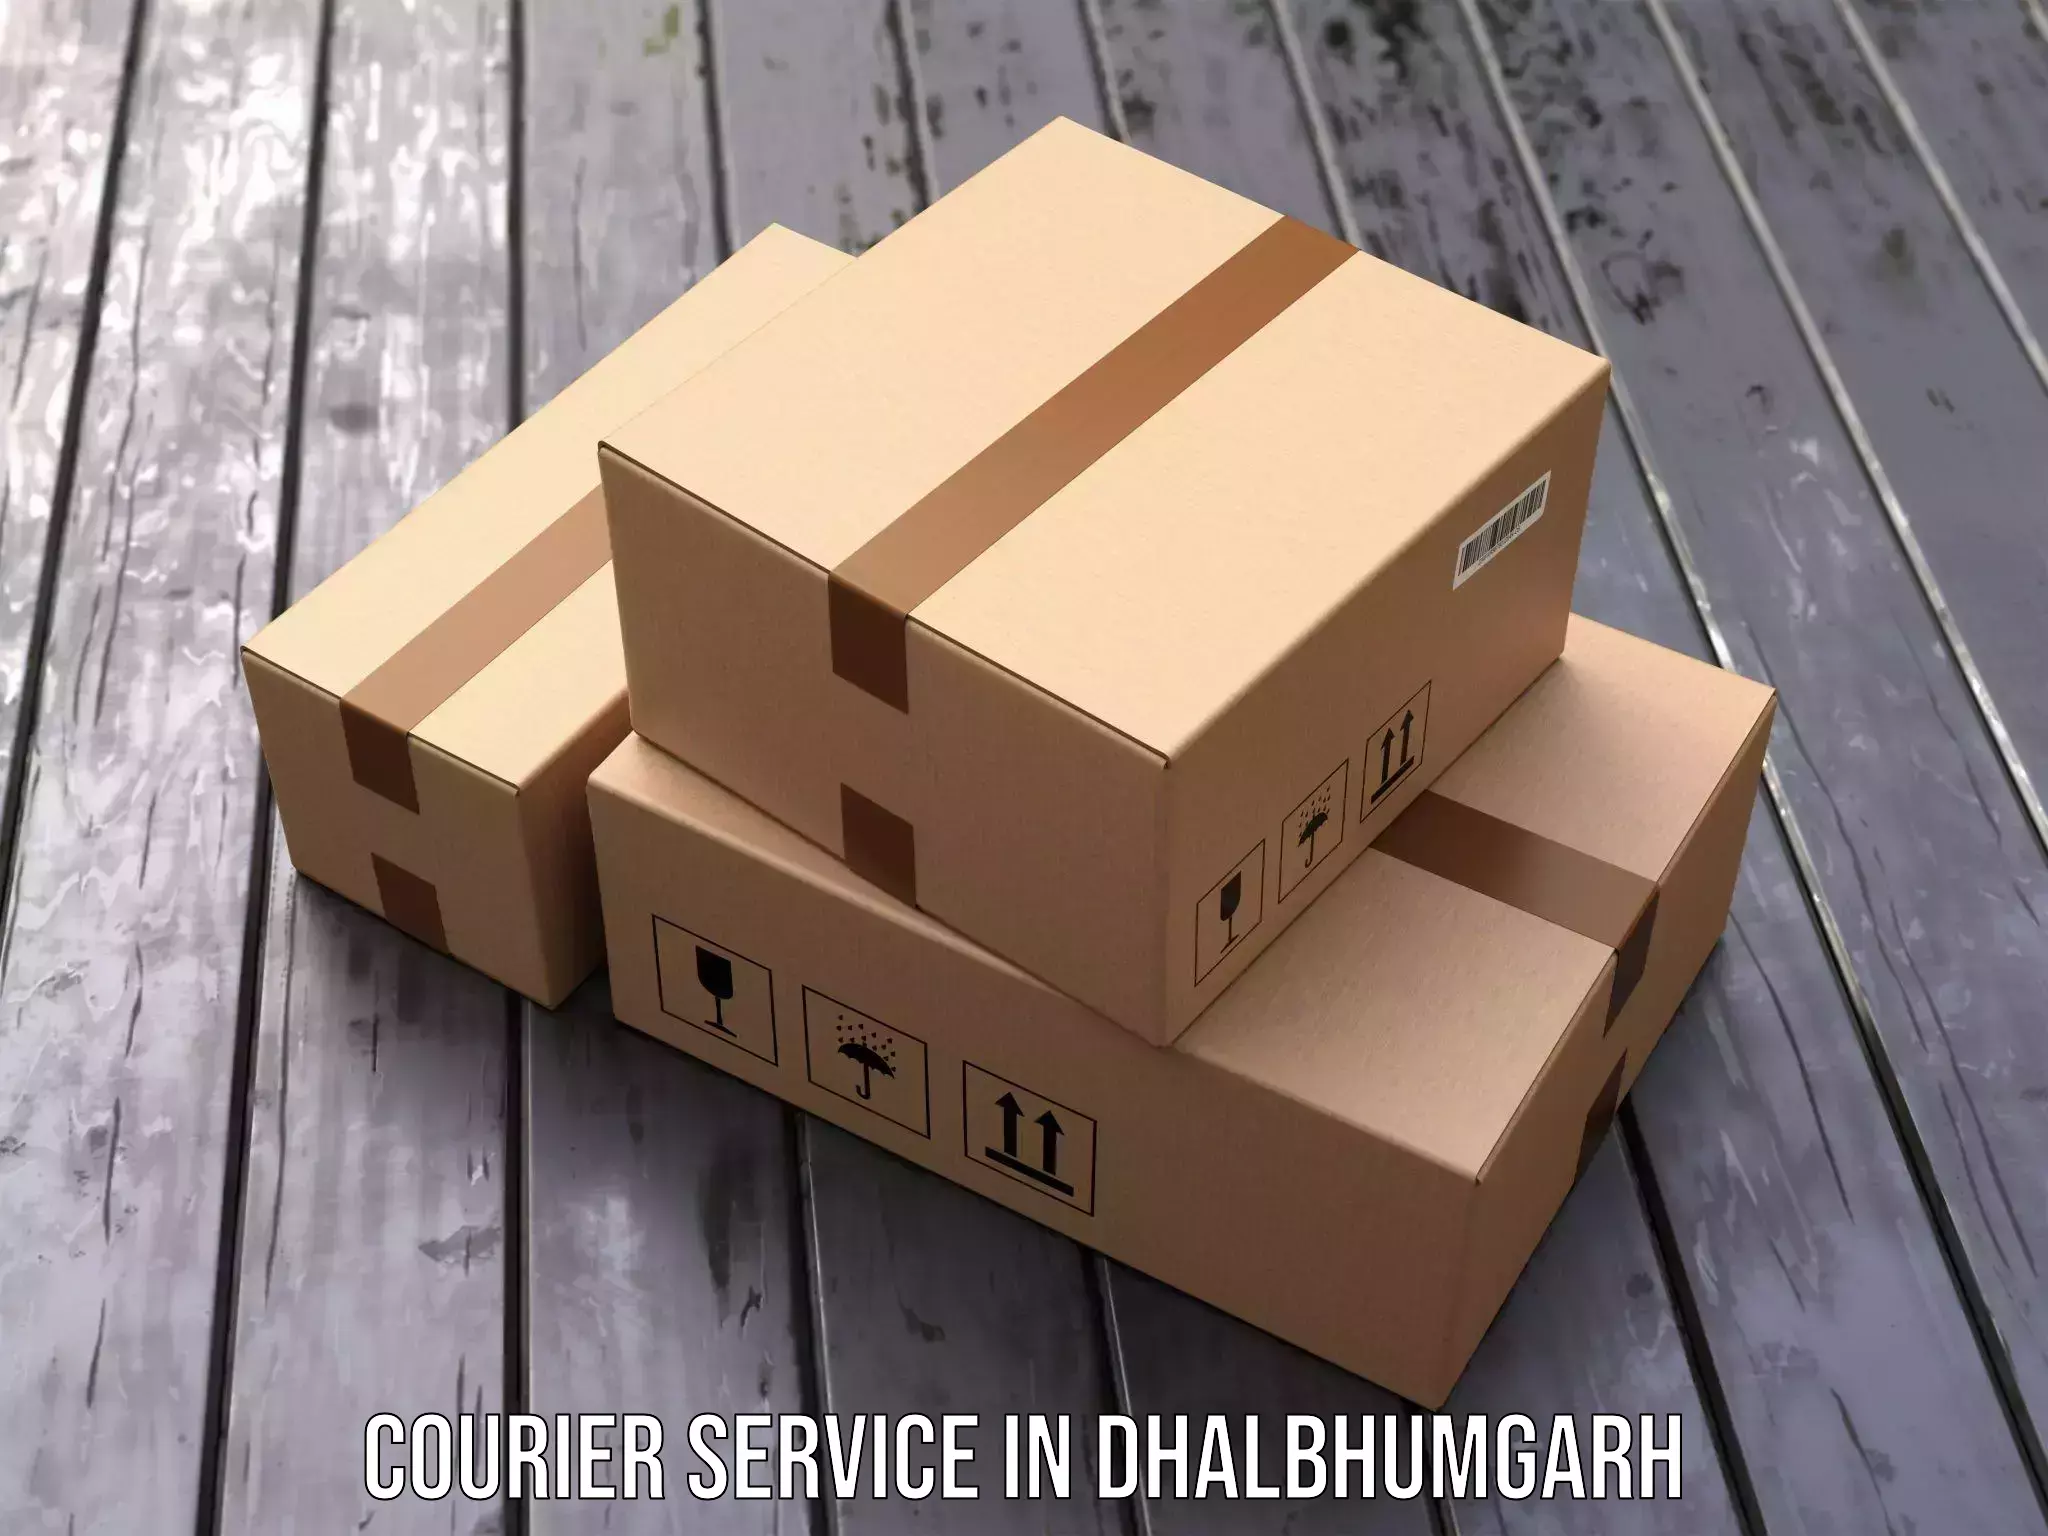 Tailored shipping plans in Dhalbhumgarh